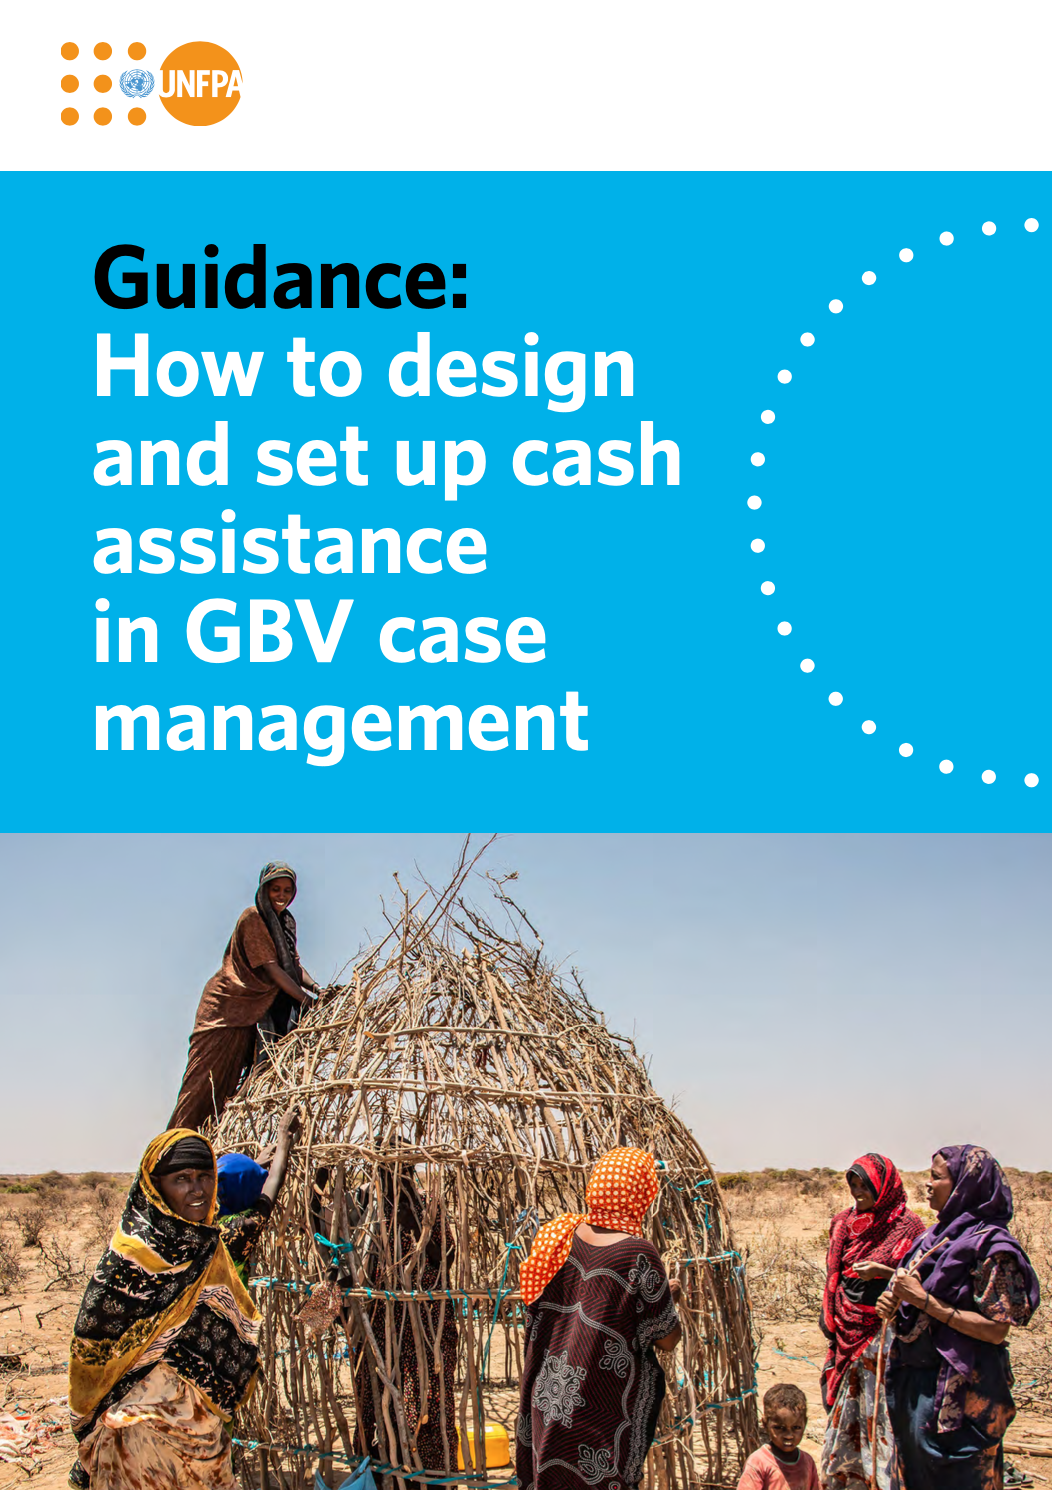 Cover page of the Guidance, featuring a photo of a group of women working together to build a hut